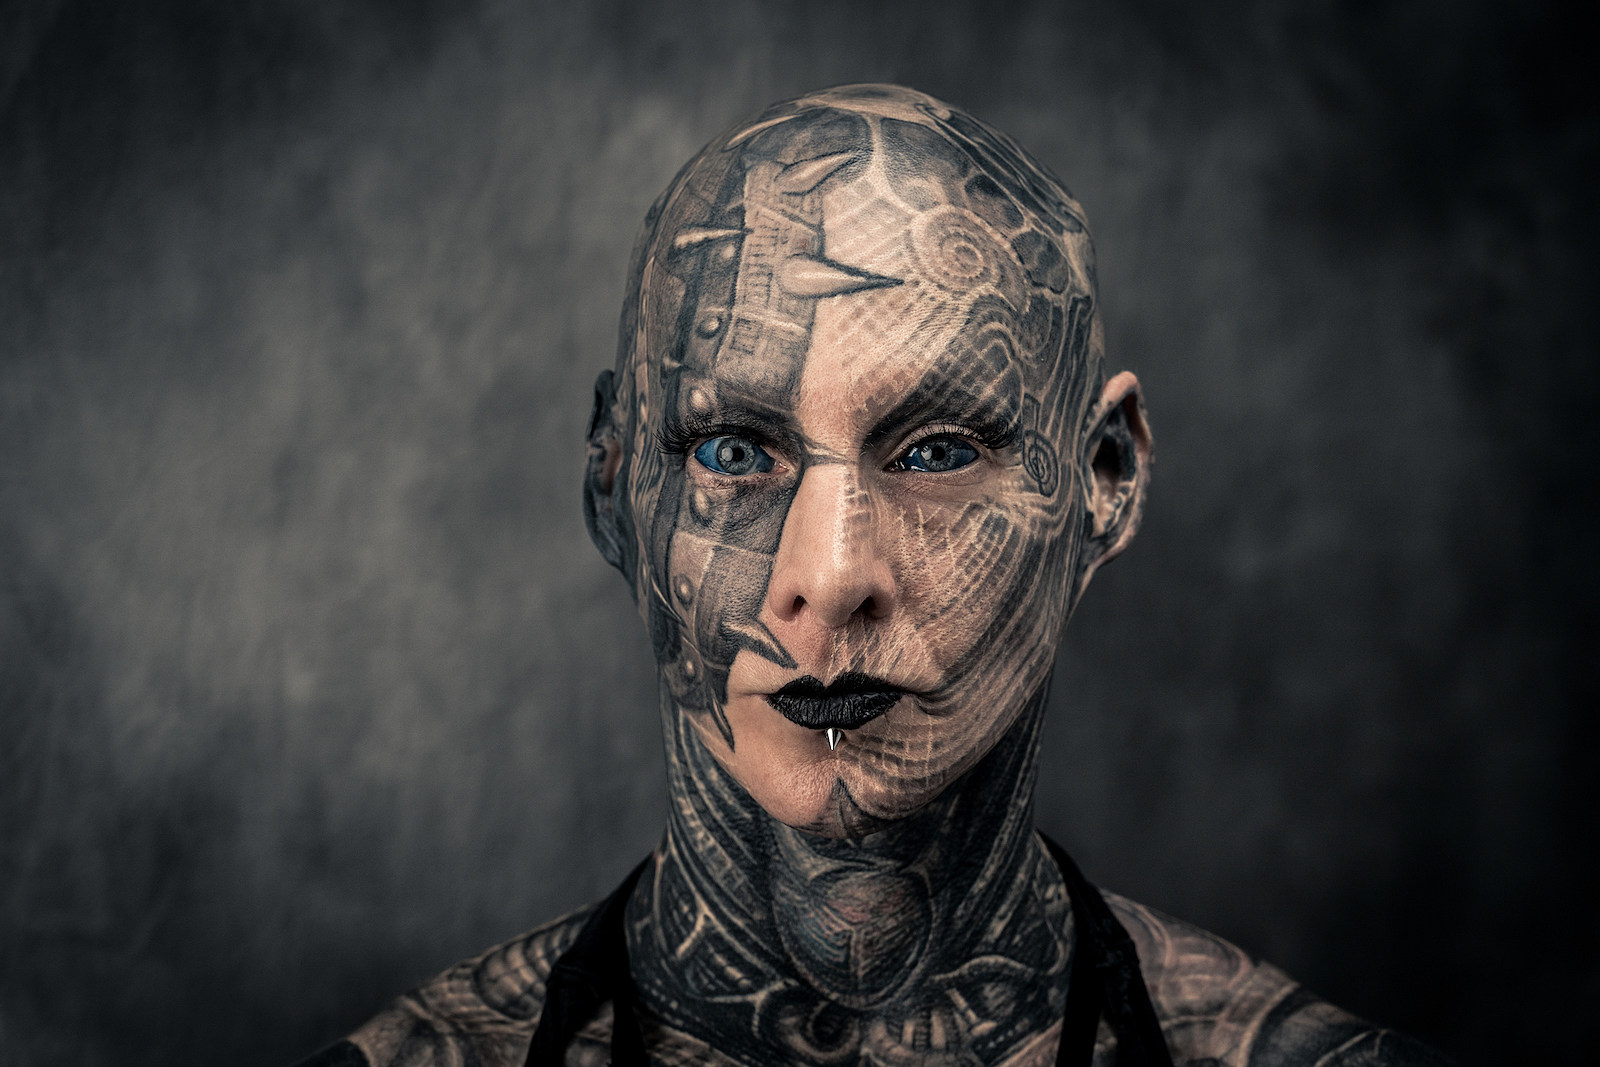 Grace Neutral: Eye Tattoos, Body Modification, And Her Clothing Collection